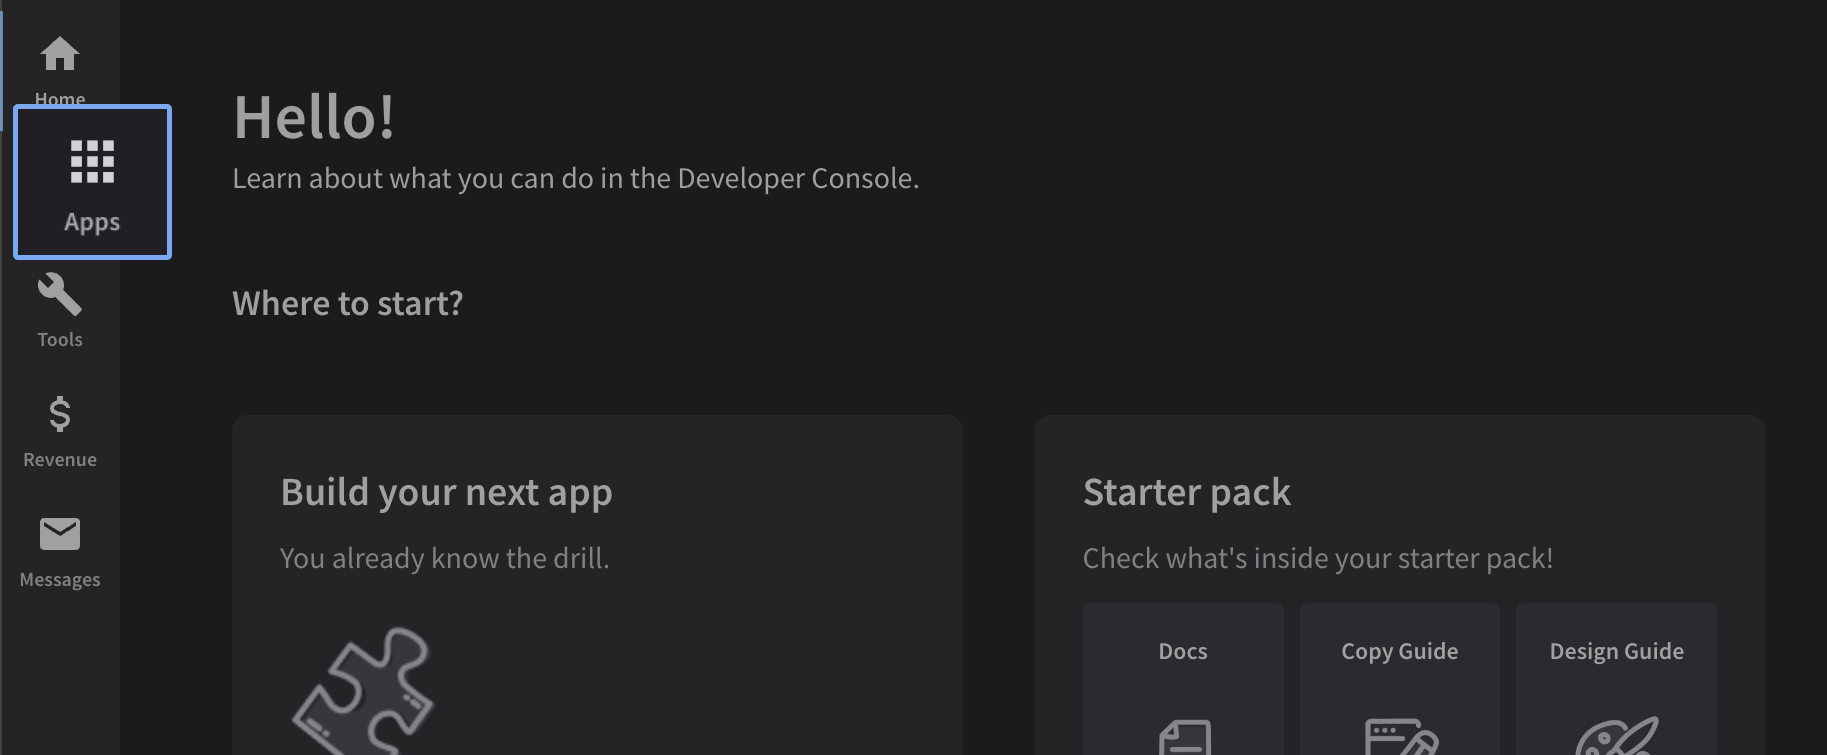 Log into your Developer Console and go to Apps